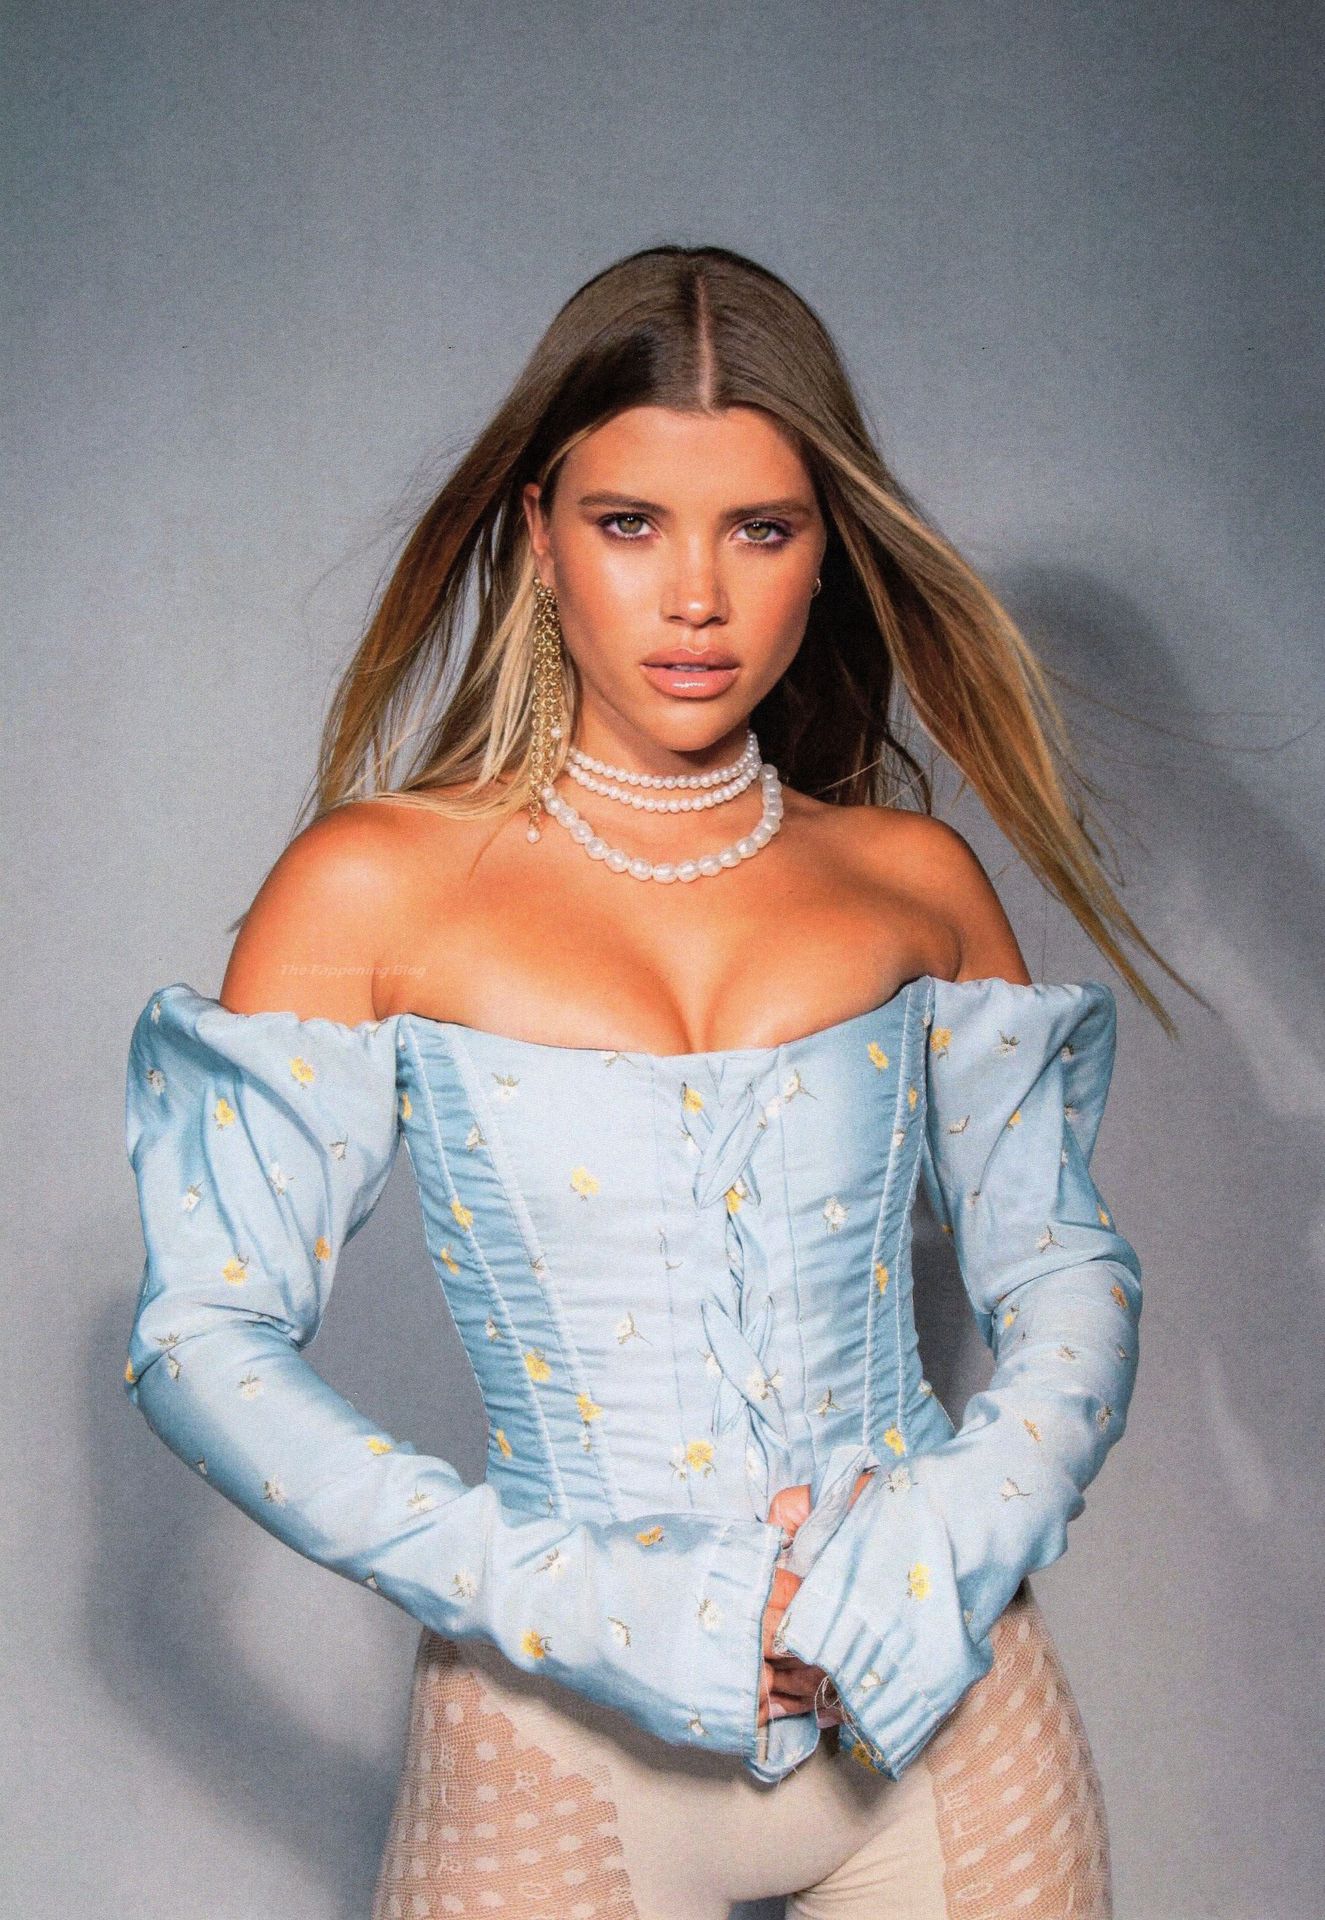 Sofia Richie Stars in a New Campaign For 8 Other Reasons (21 Photos)